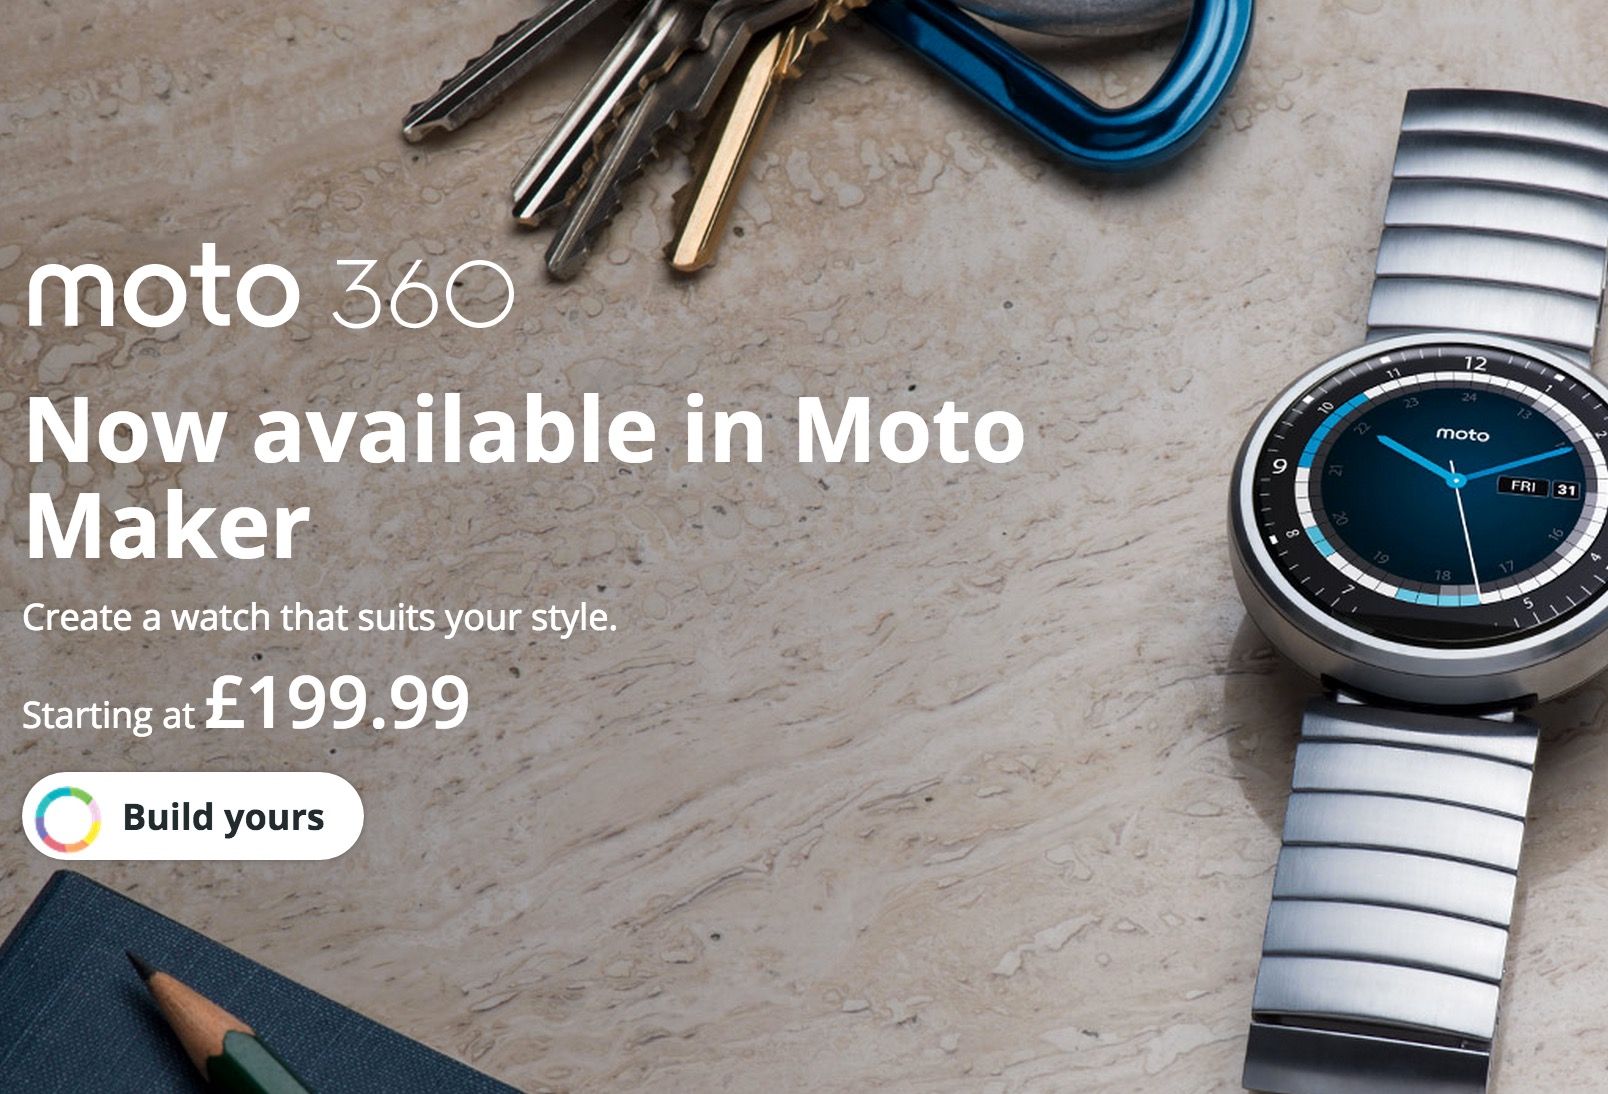 moto maker for moto 360 comes to the uk alongside moto g with 4g lte image 1